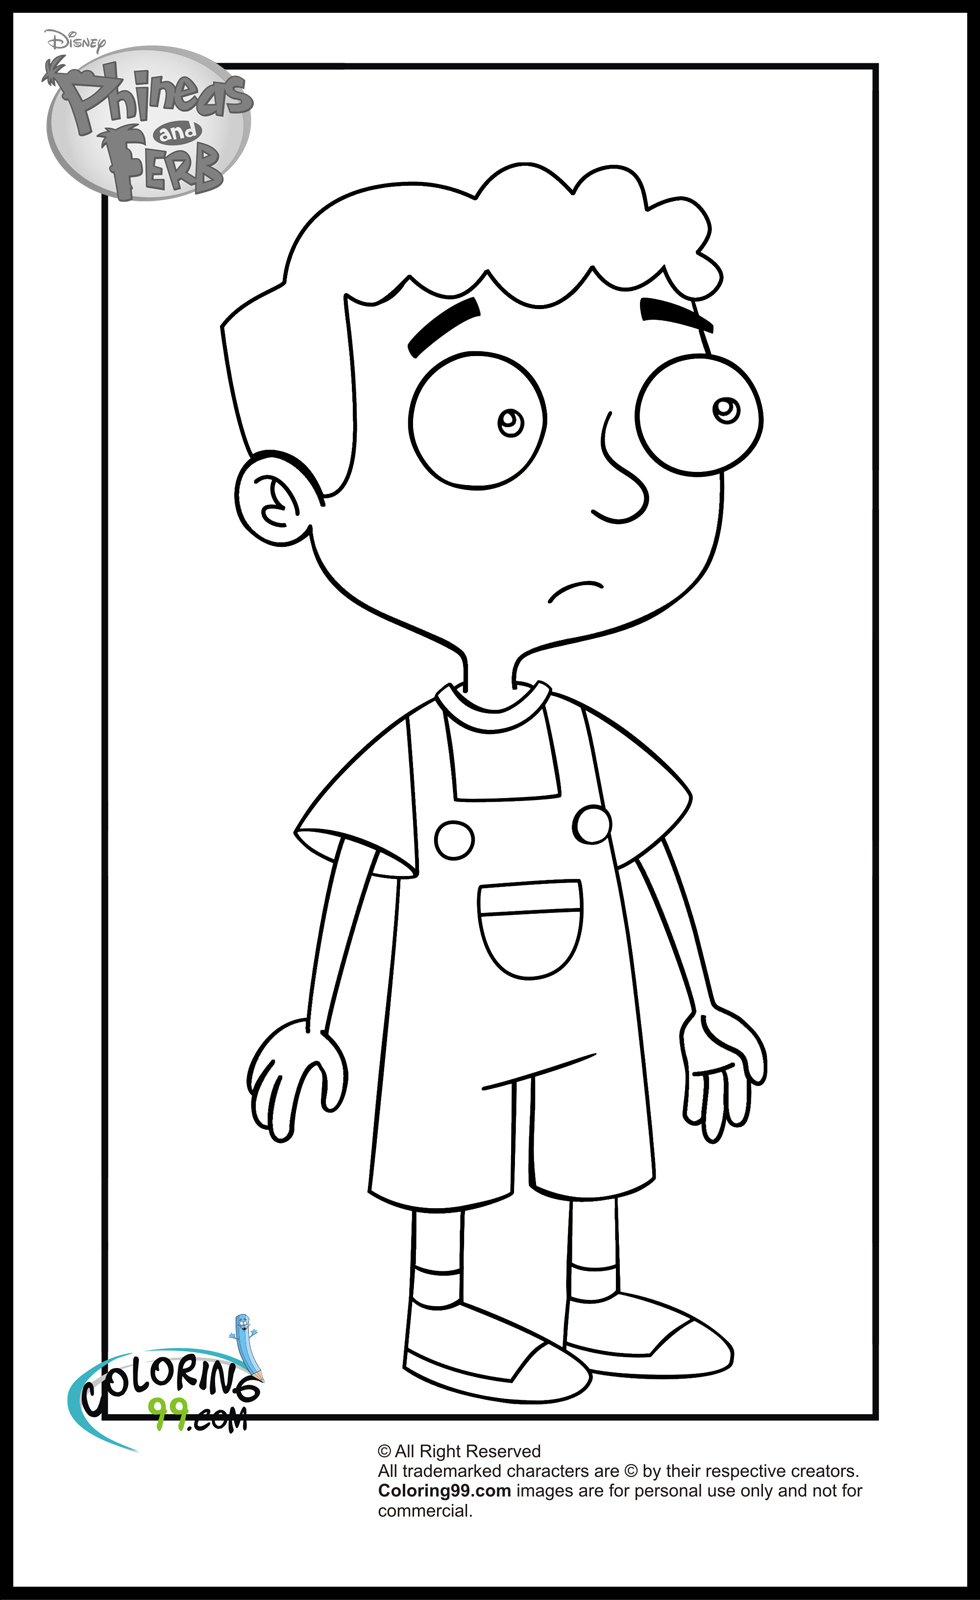 phineas and ferb baljeet tjinder coloring pages